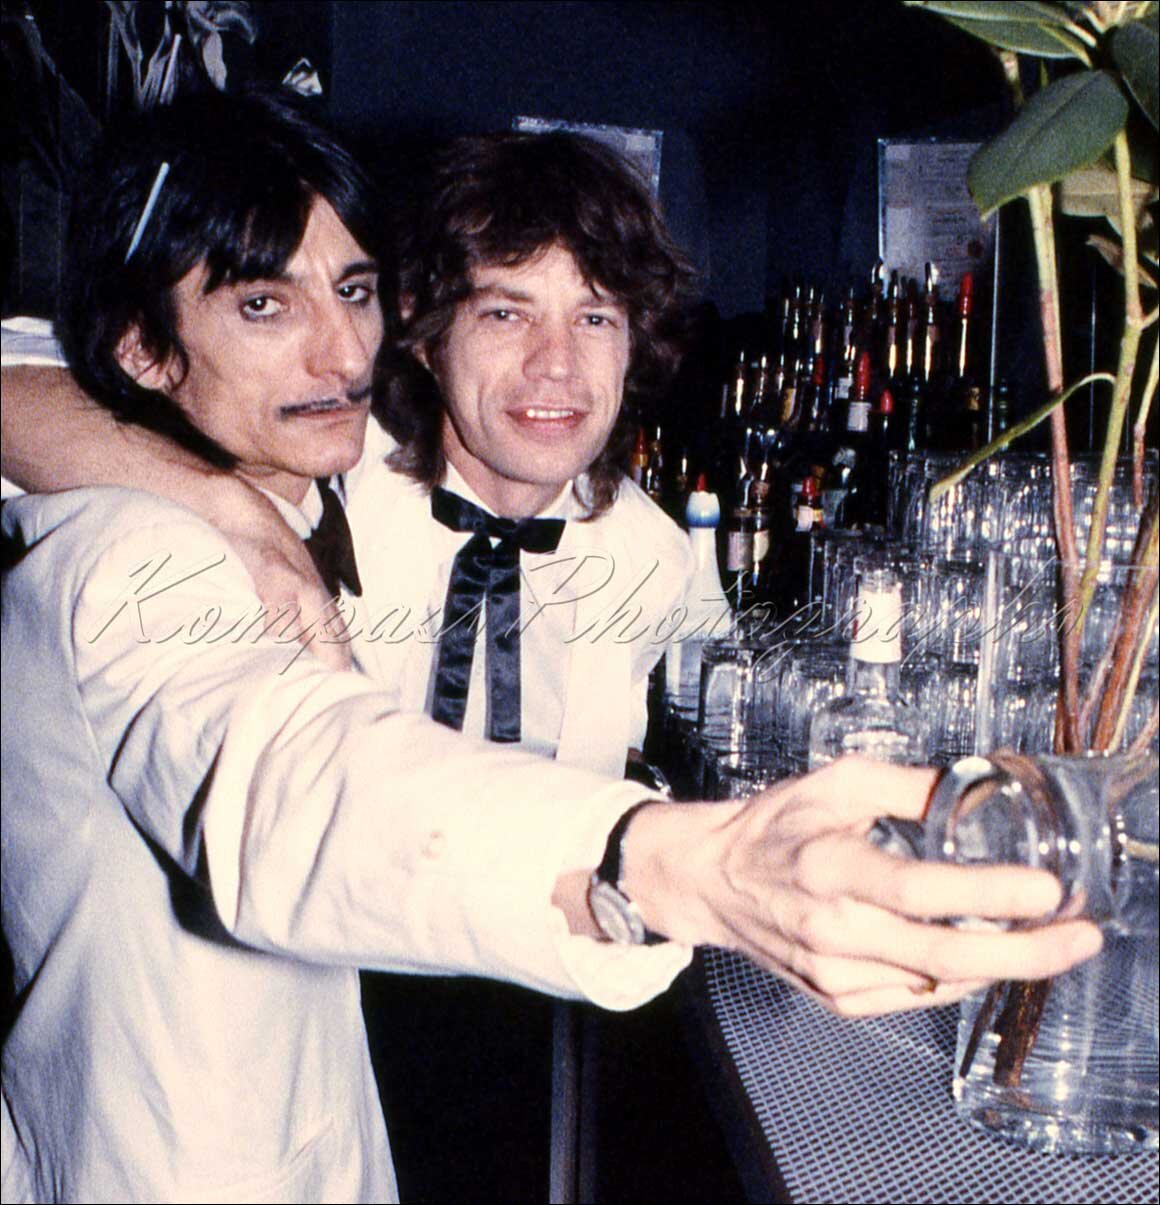 rolling stones private party park west chicago november 25 1981